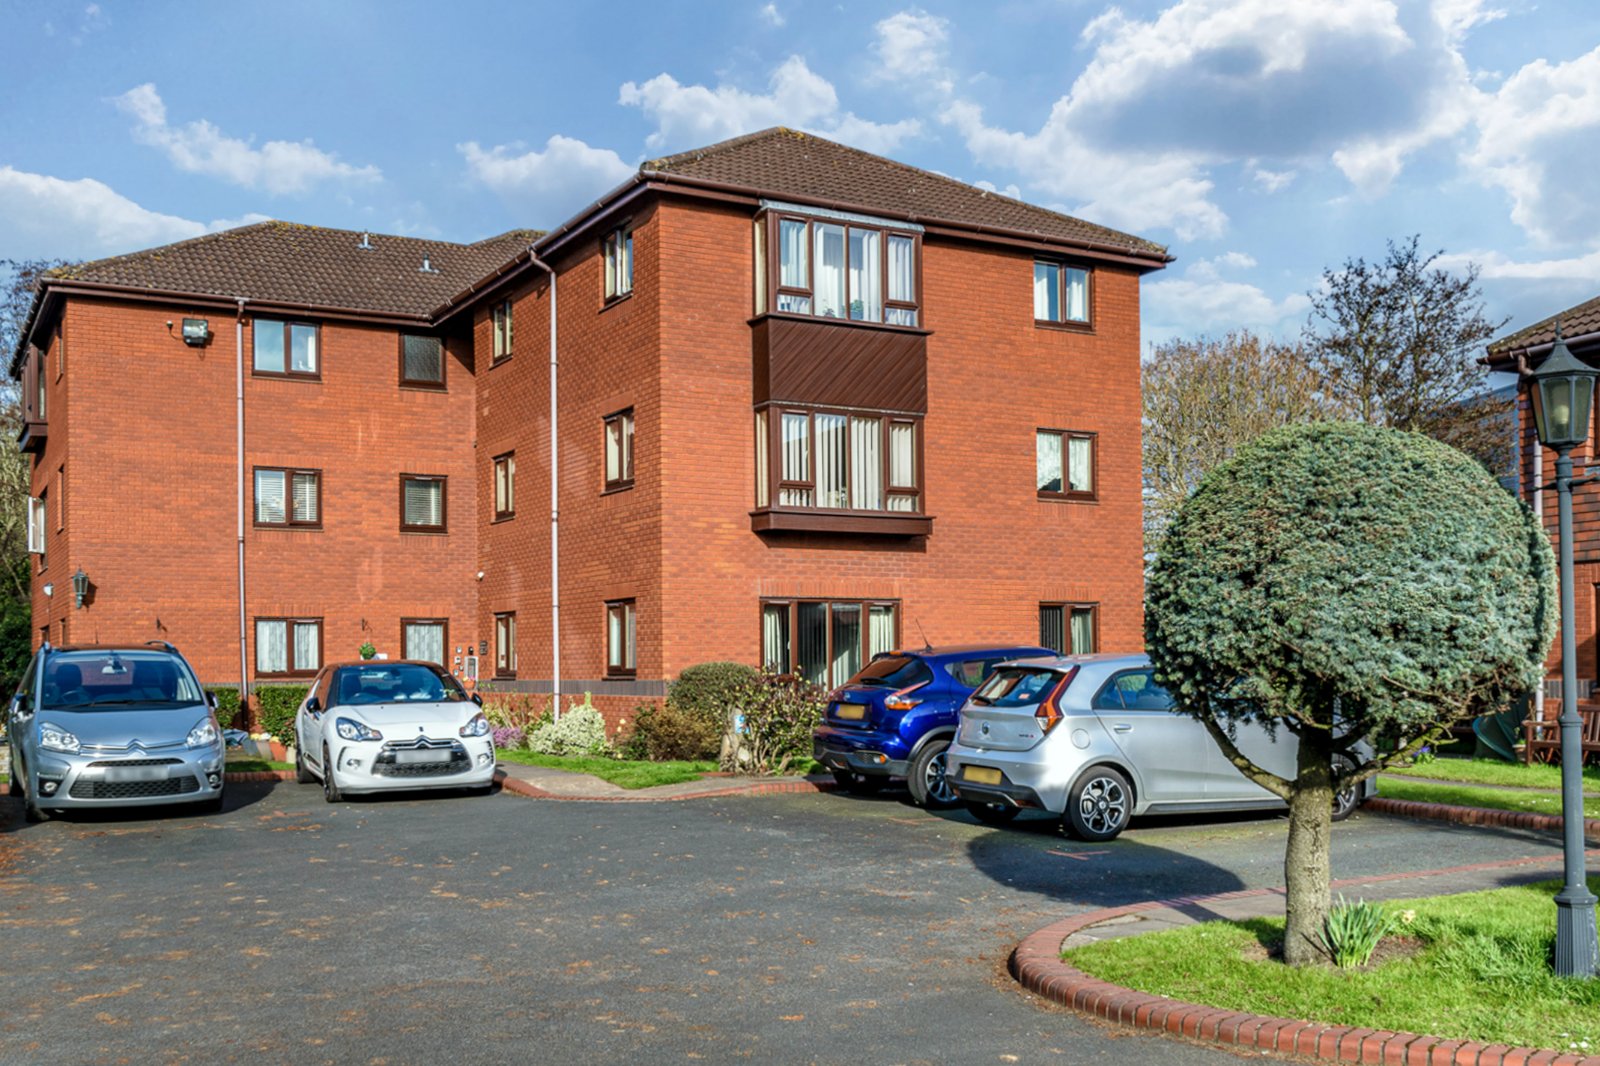 1 bed  for sale in Housman Park, Bromsgrove - Property Image 1